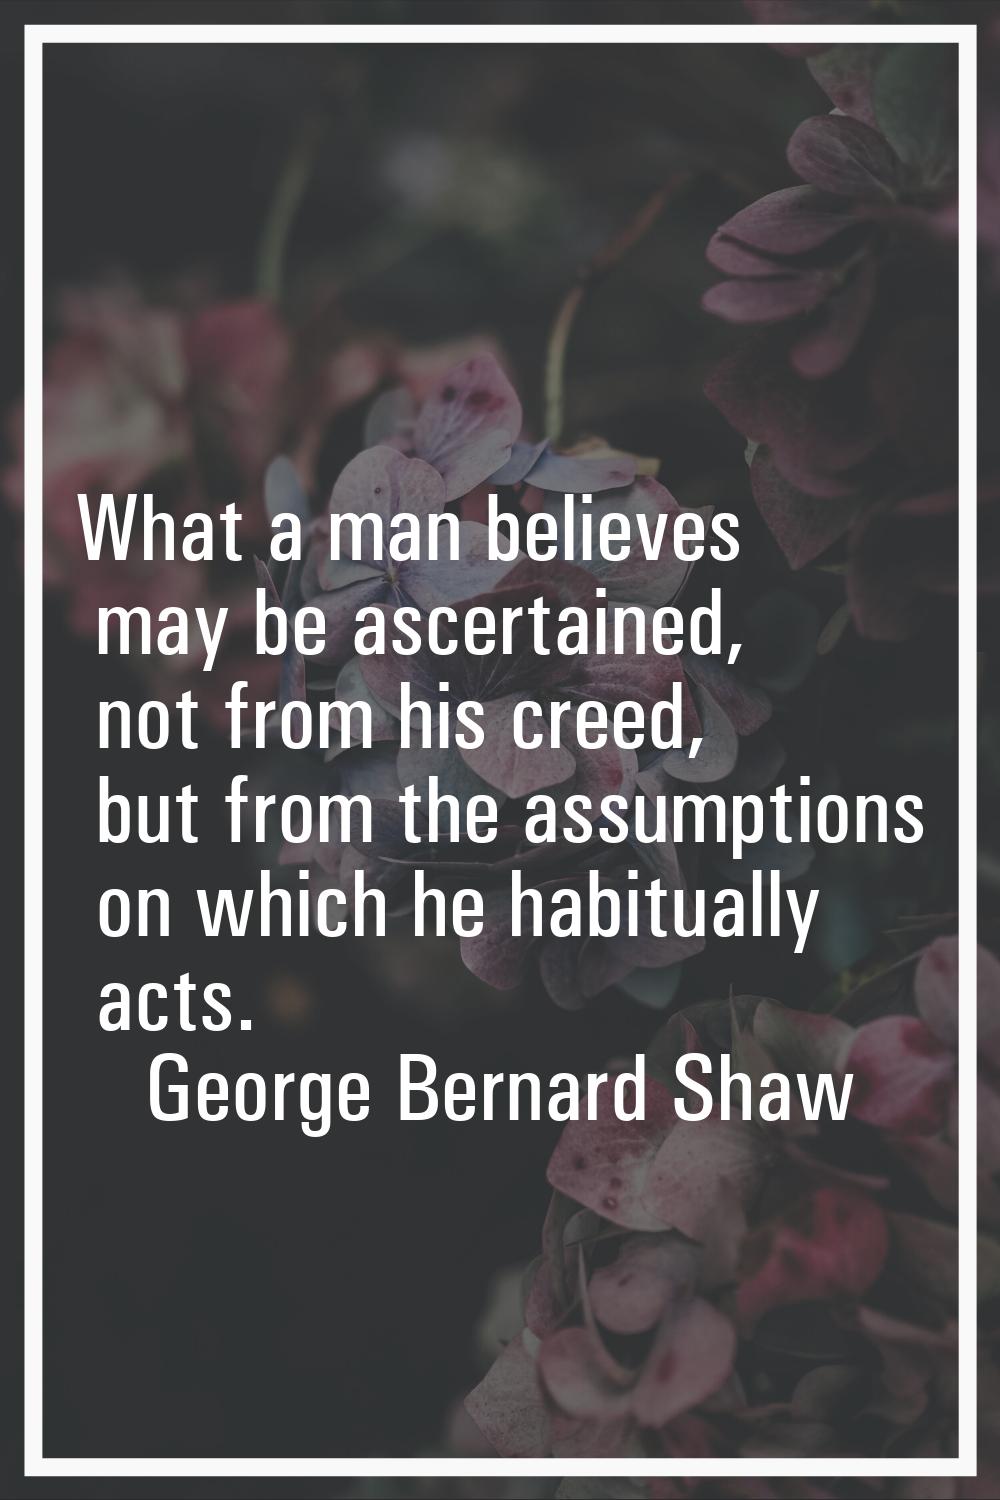 What a man believes may be ascertained, not from his creed, but from the assumptions on which he ha